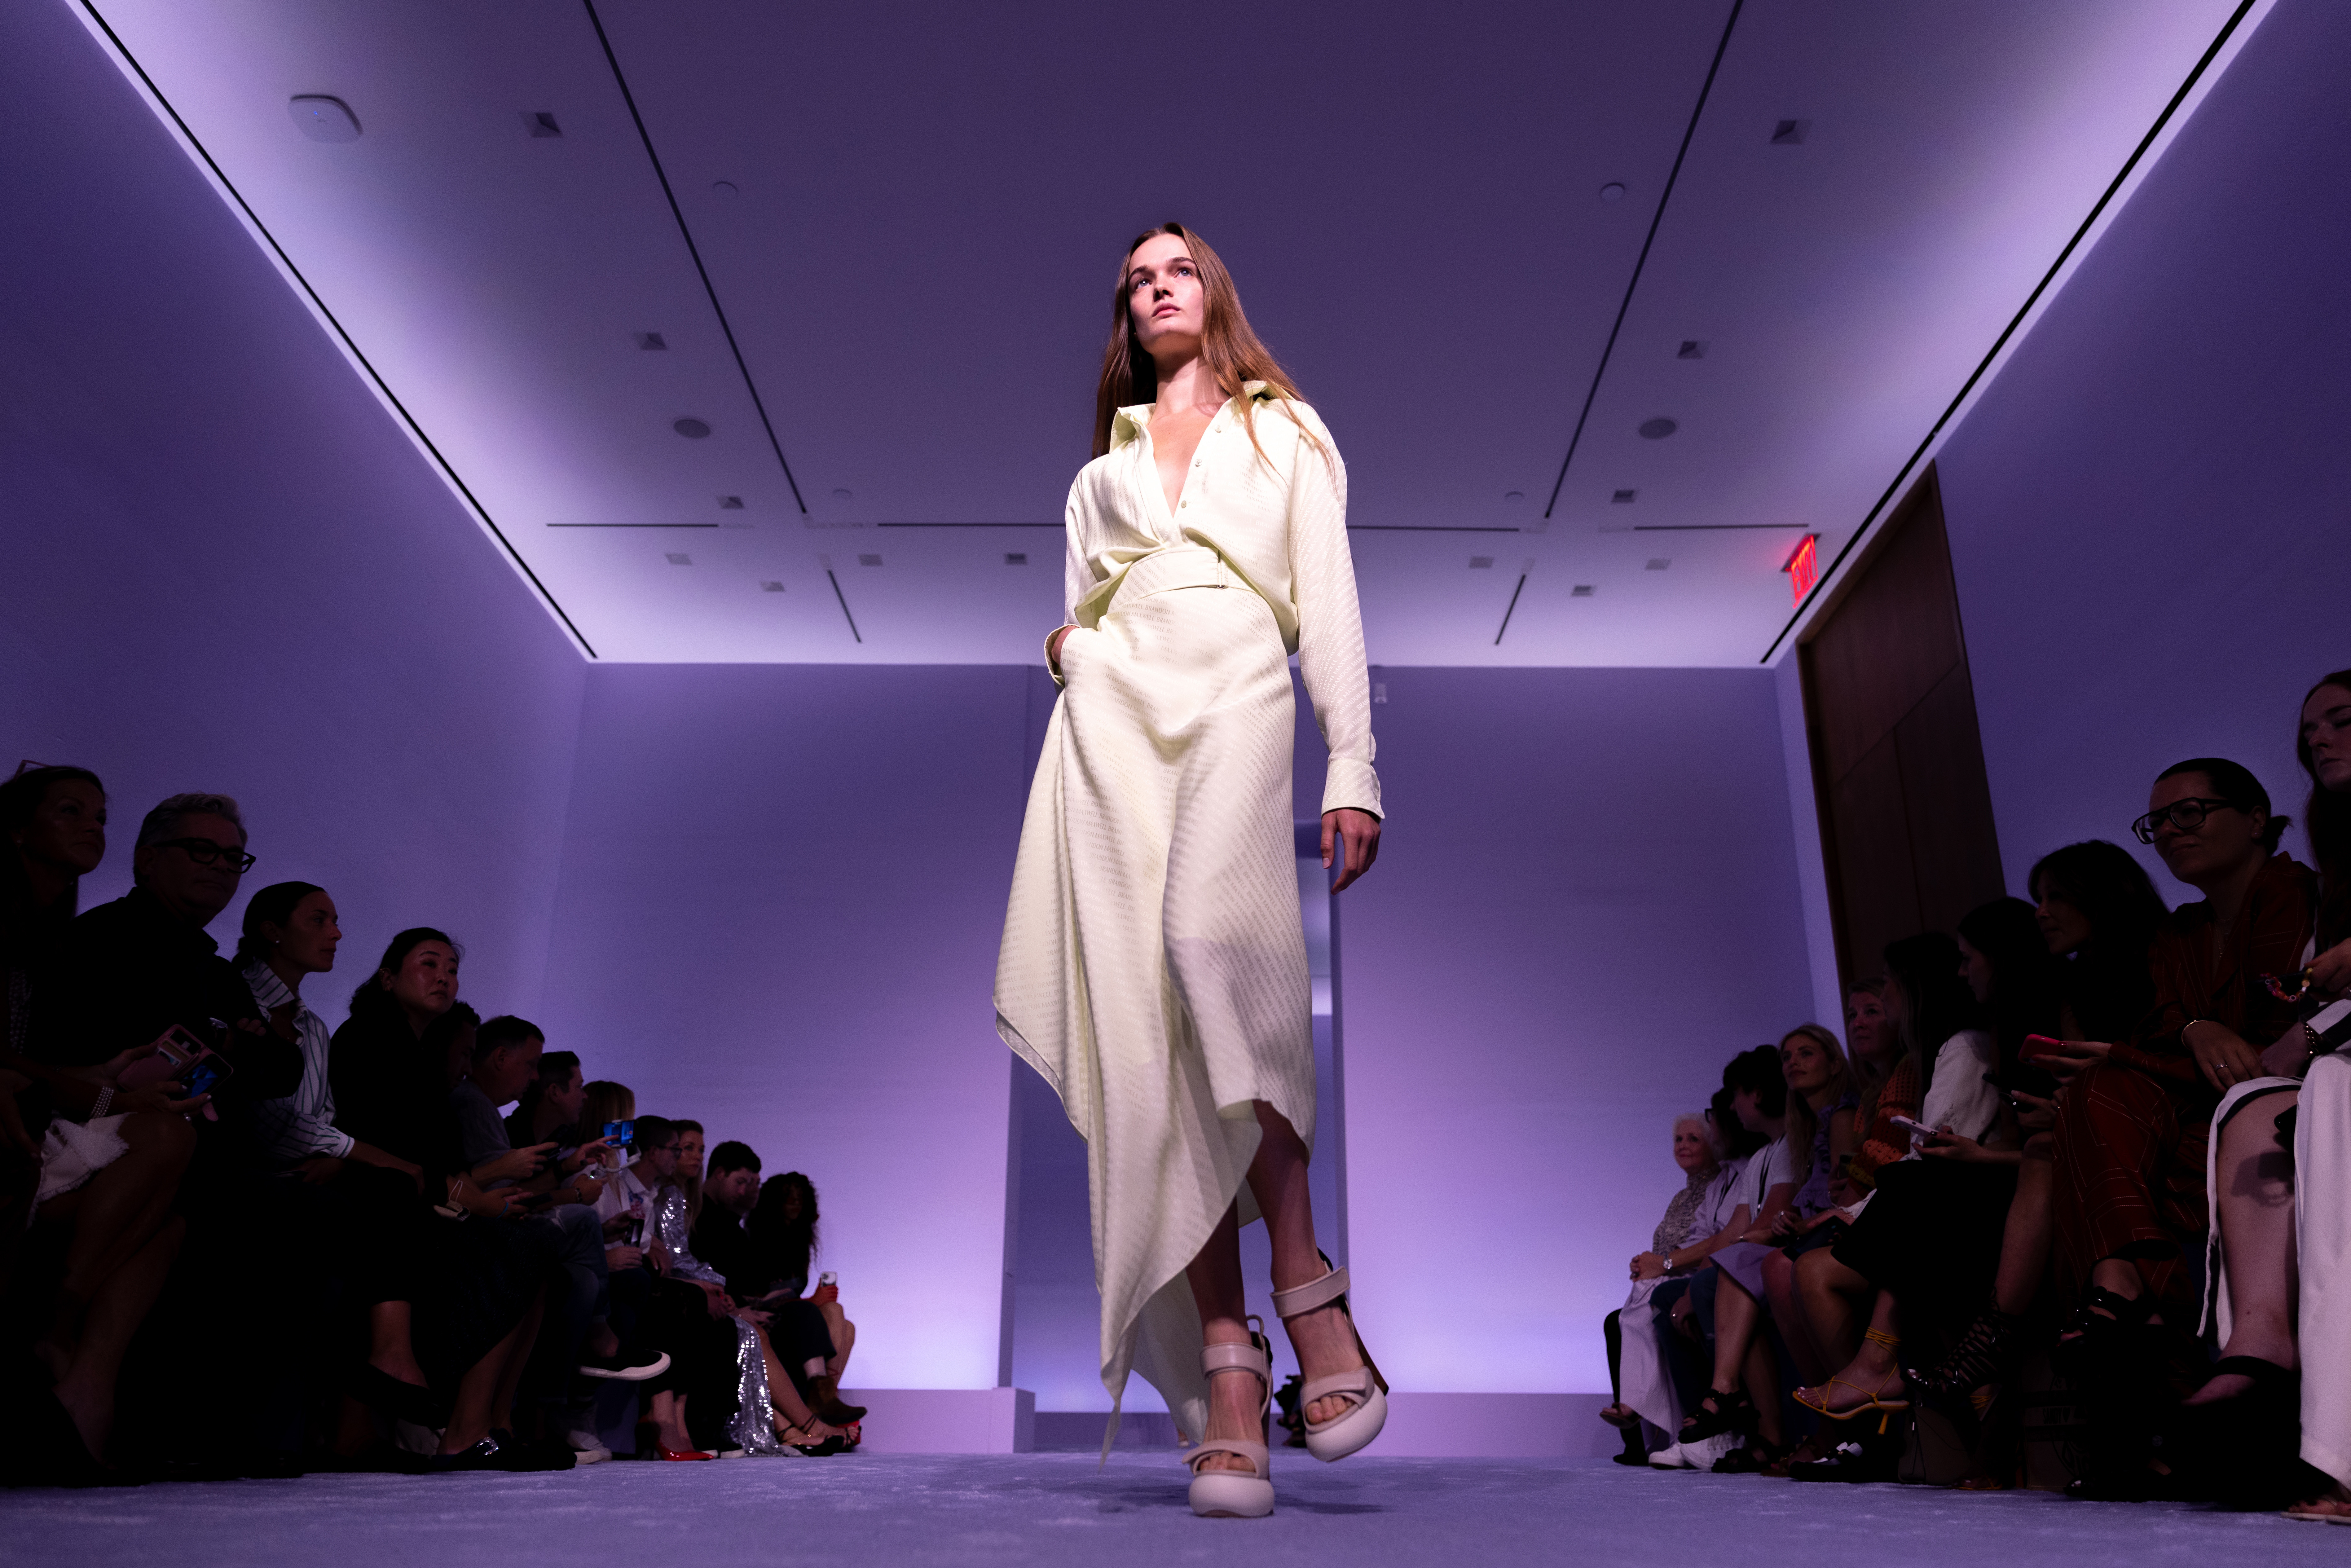 Maxwell brings shimmer, shine and smiles to NY Fashion Week, iNFOnews